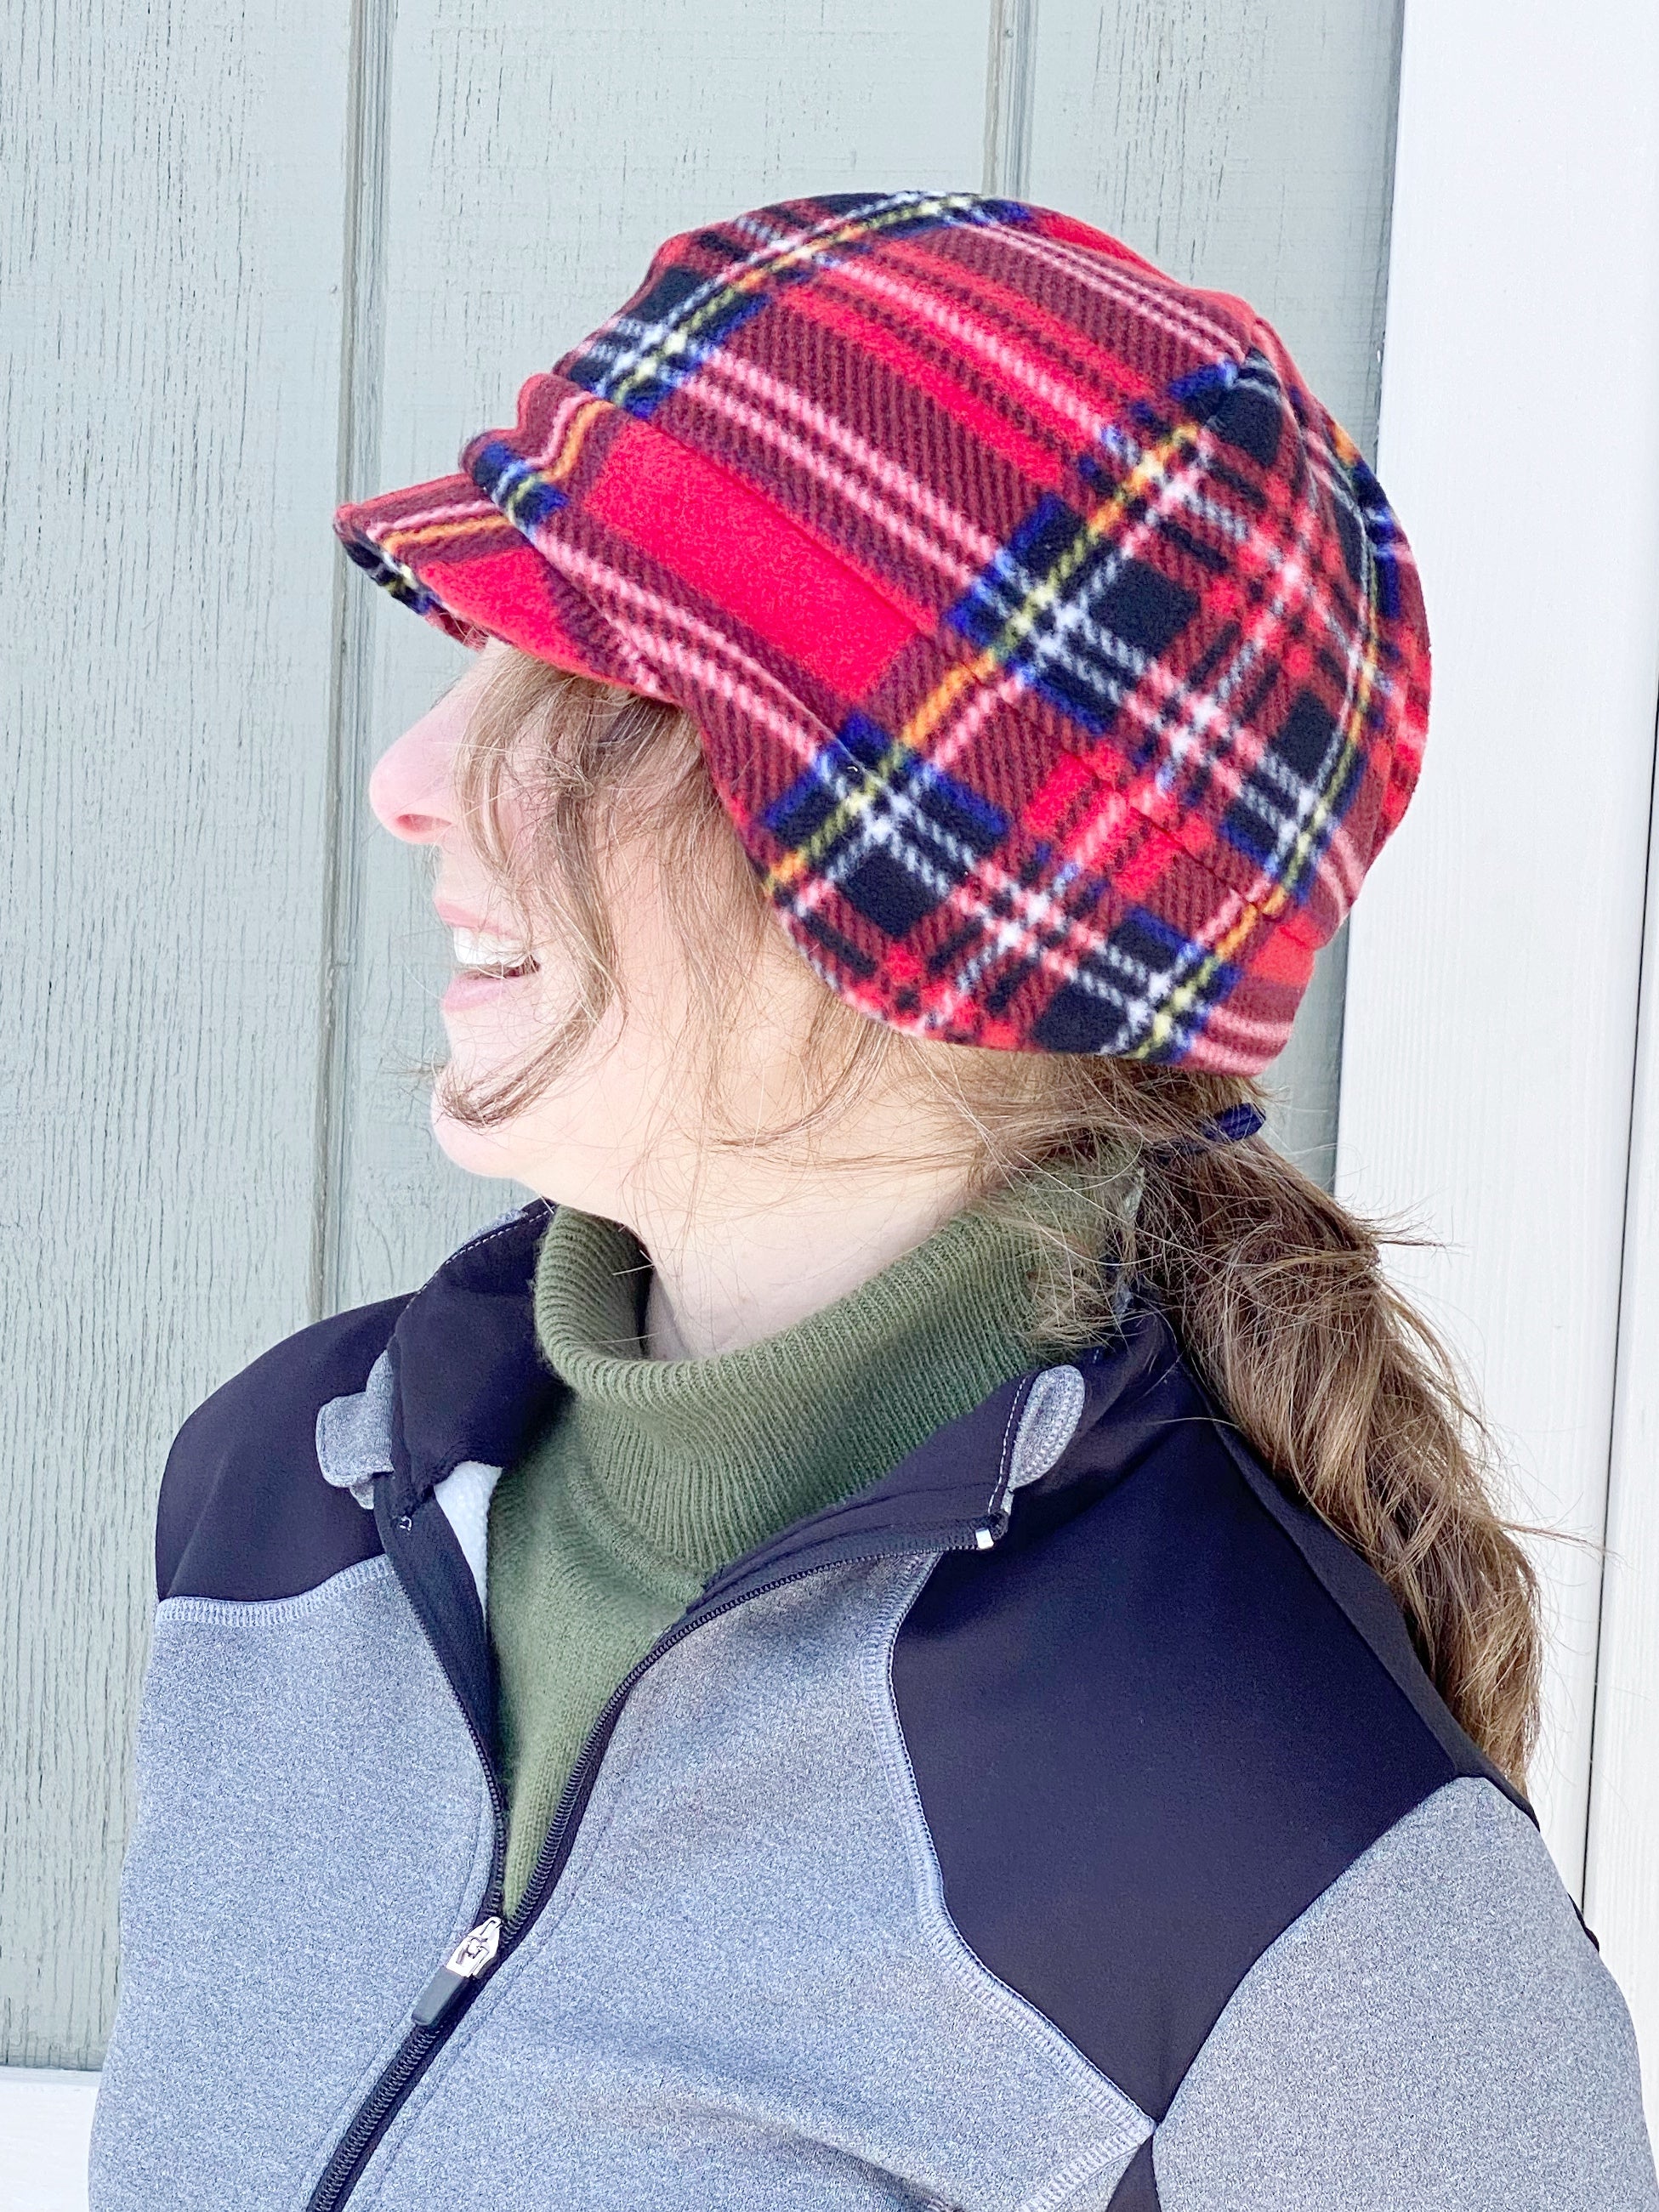 Red Stewart Plaid Winter Earflap be – Bound Hat to for Creative Adults Beanie